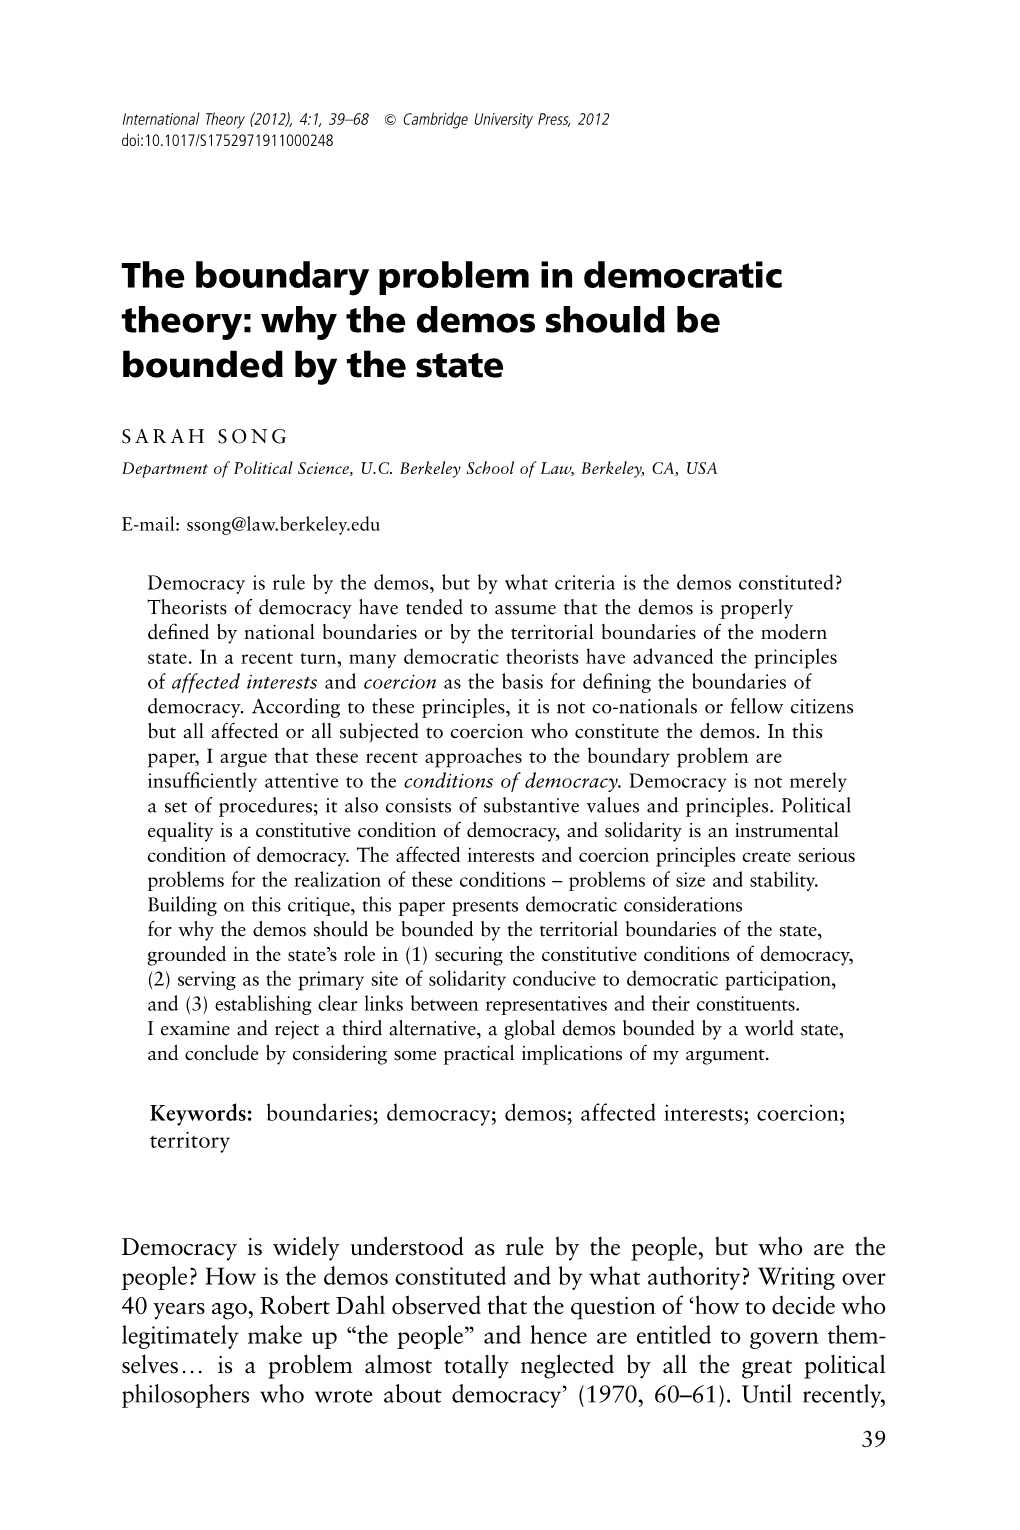 The Boundary Problem in Democratic Theory: Why the Demos Should Be Bounded by the State